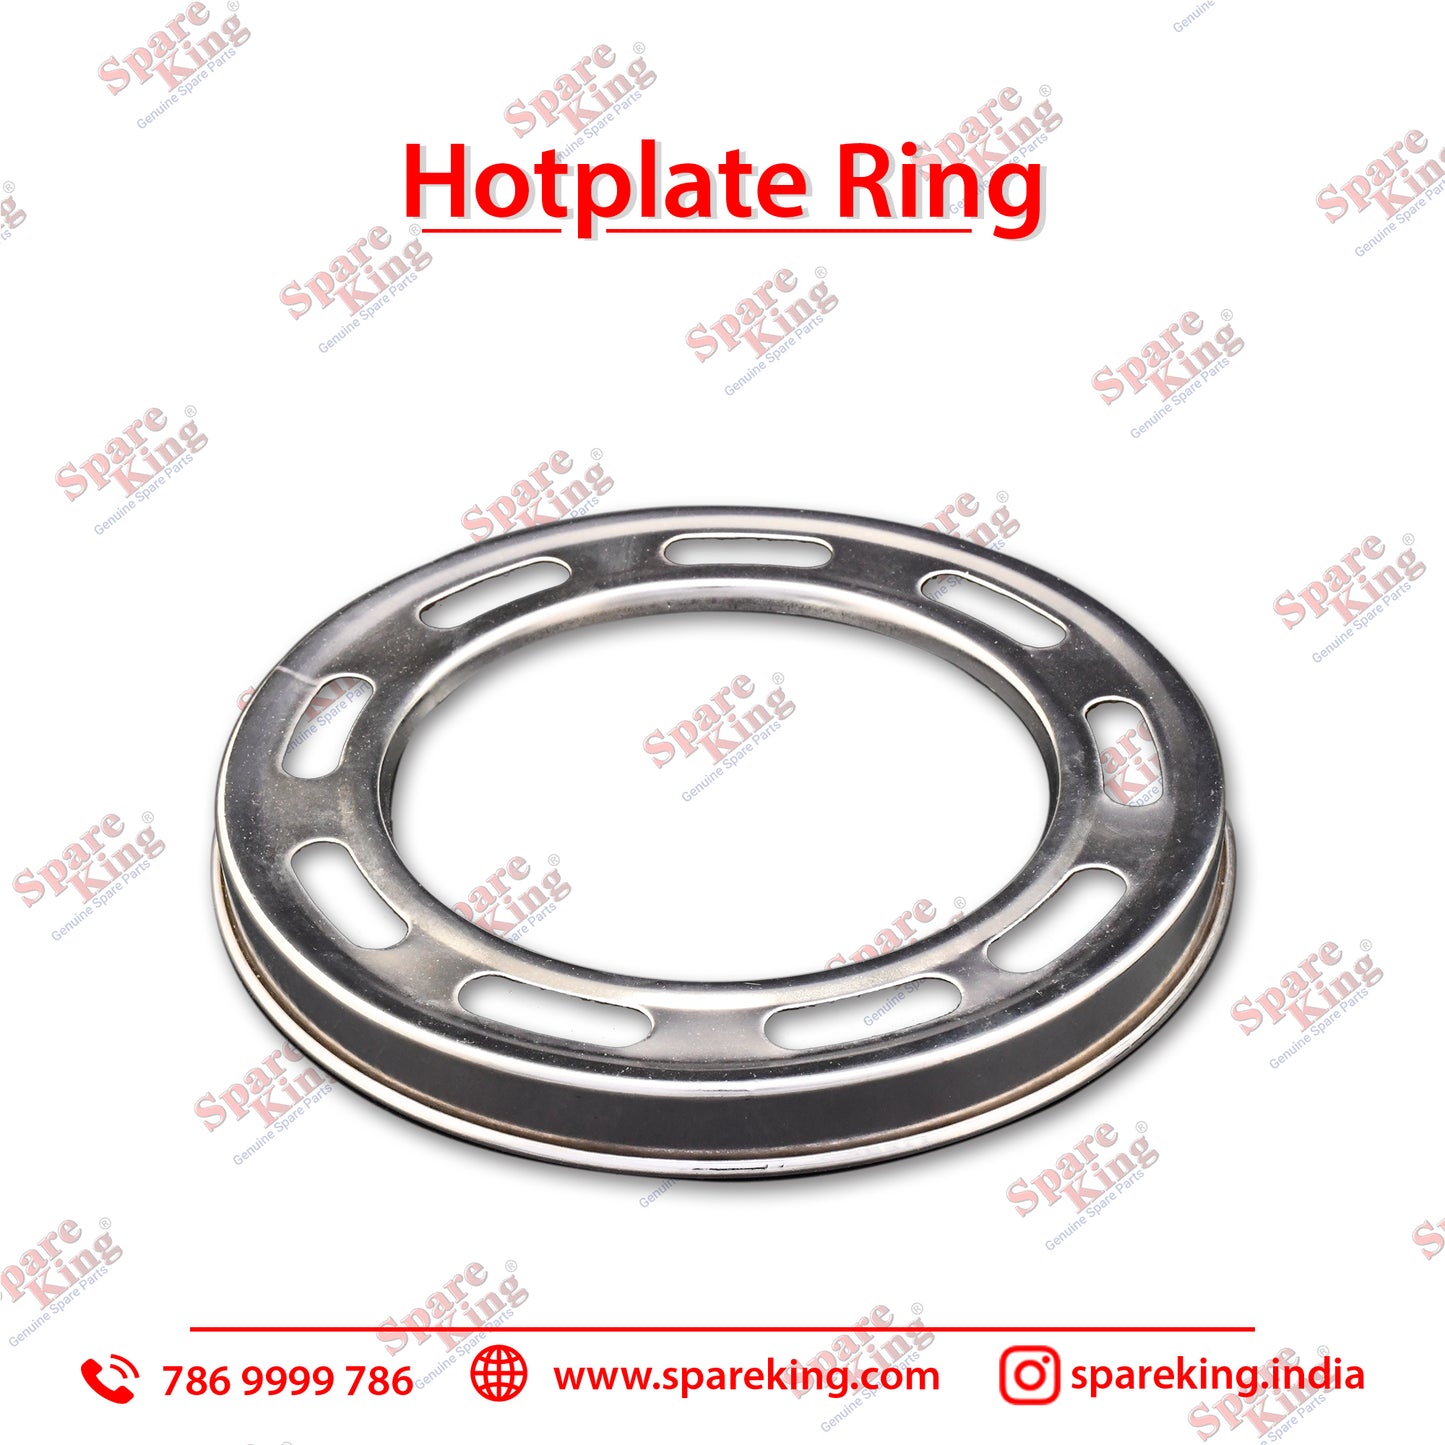 Hot Plate Ring